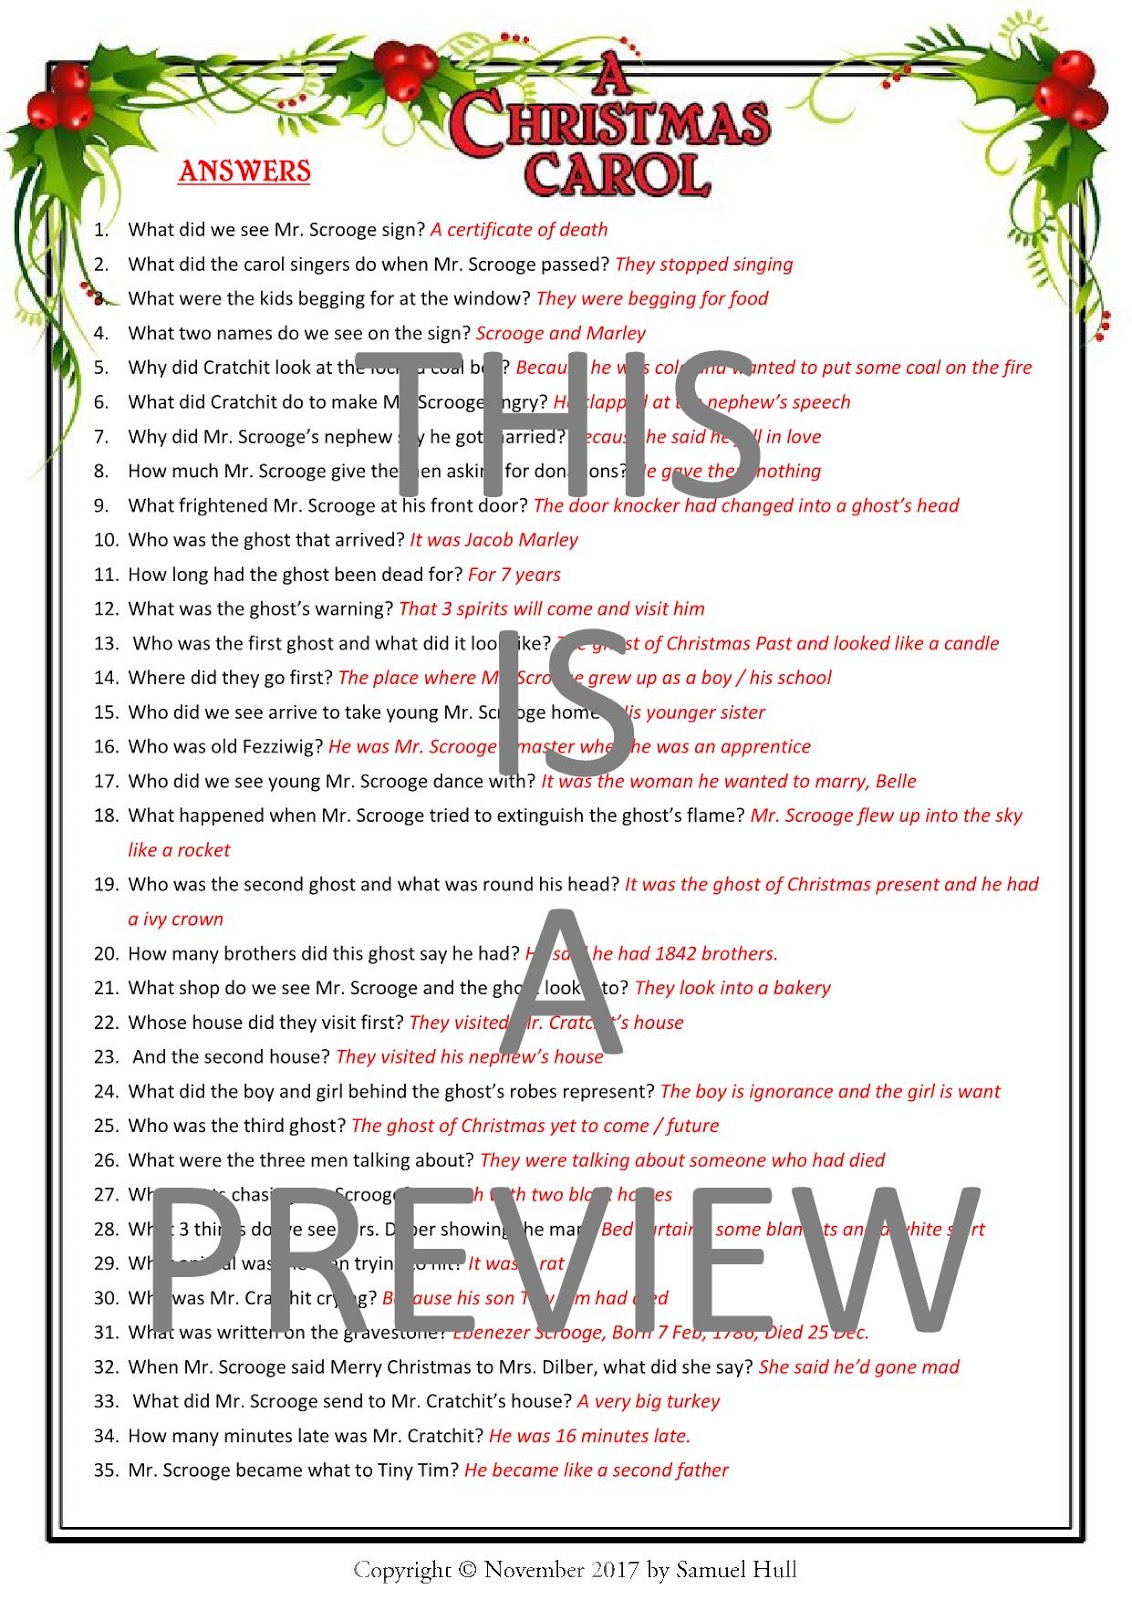 A Christmas Carol Movie Guide + Activities (Color + B/W) - Answer Key ...